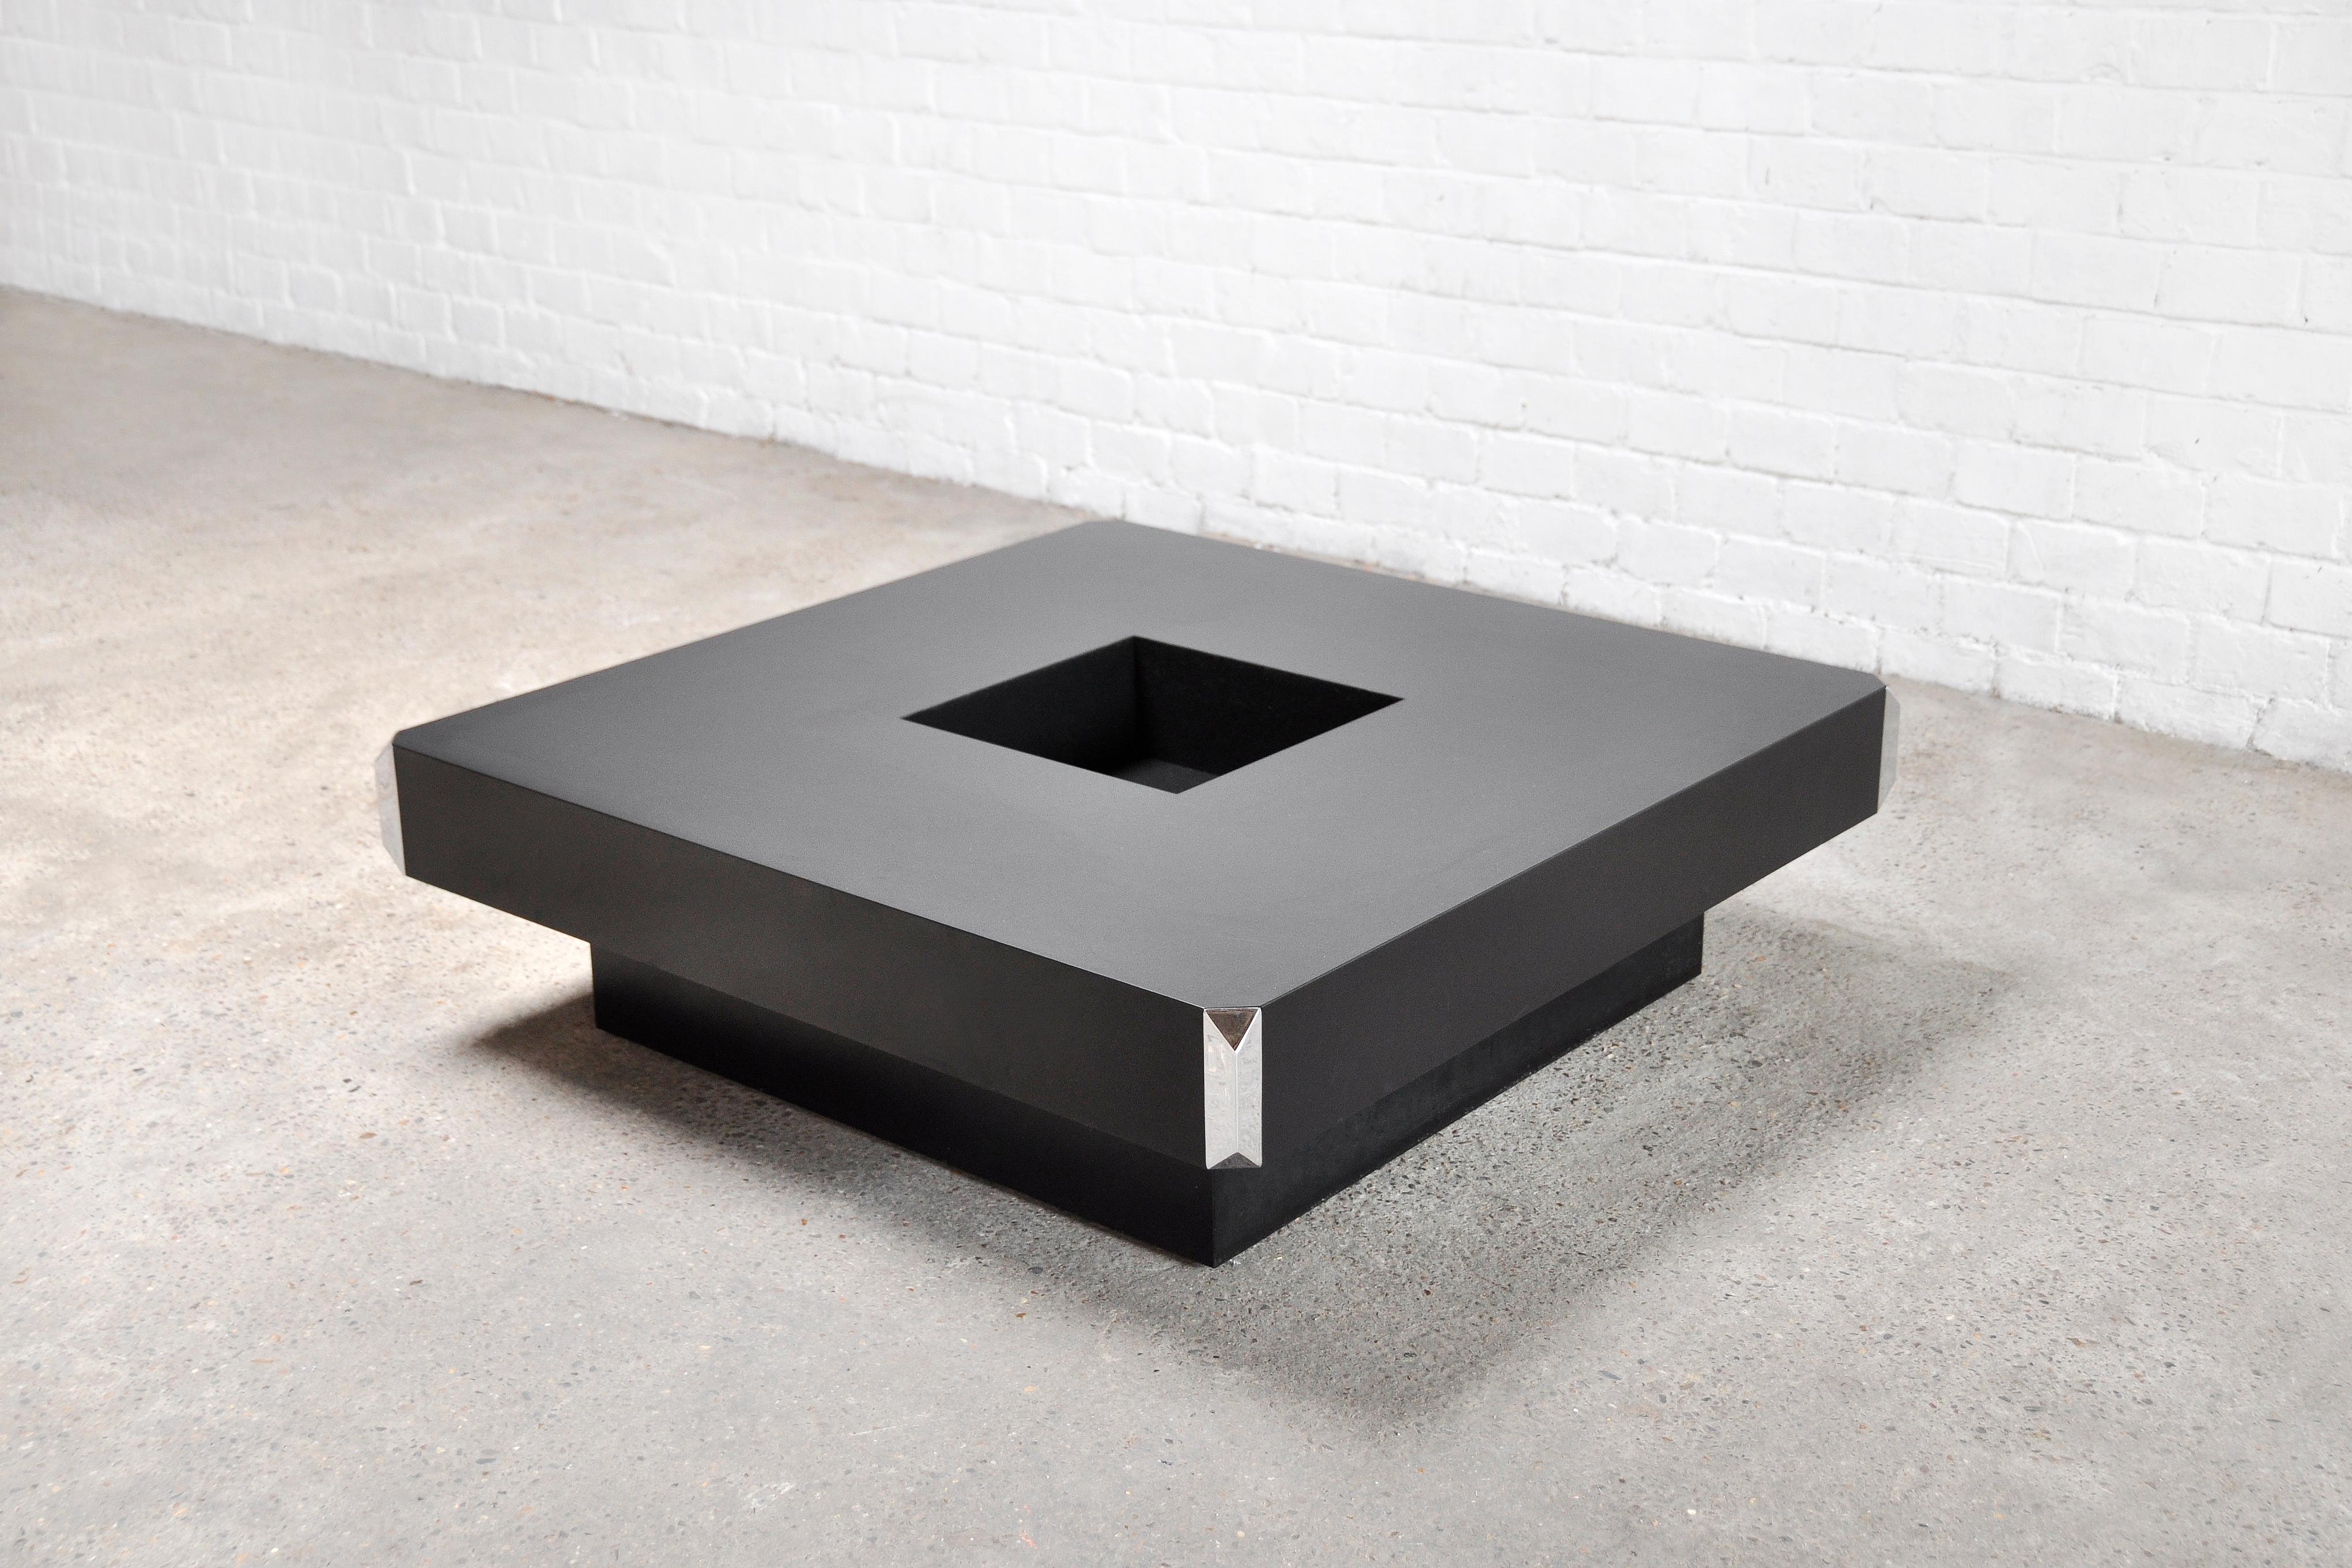 Square 'Alveo' coffee table made by Willy Rizzo for Mario Sabot, Italy 1970's. This model is constructed of matt lacquered wood with aluminum-finished corners. In the middle is a compartment that can be used as a bar or to display decoration.